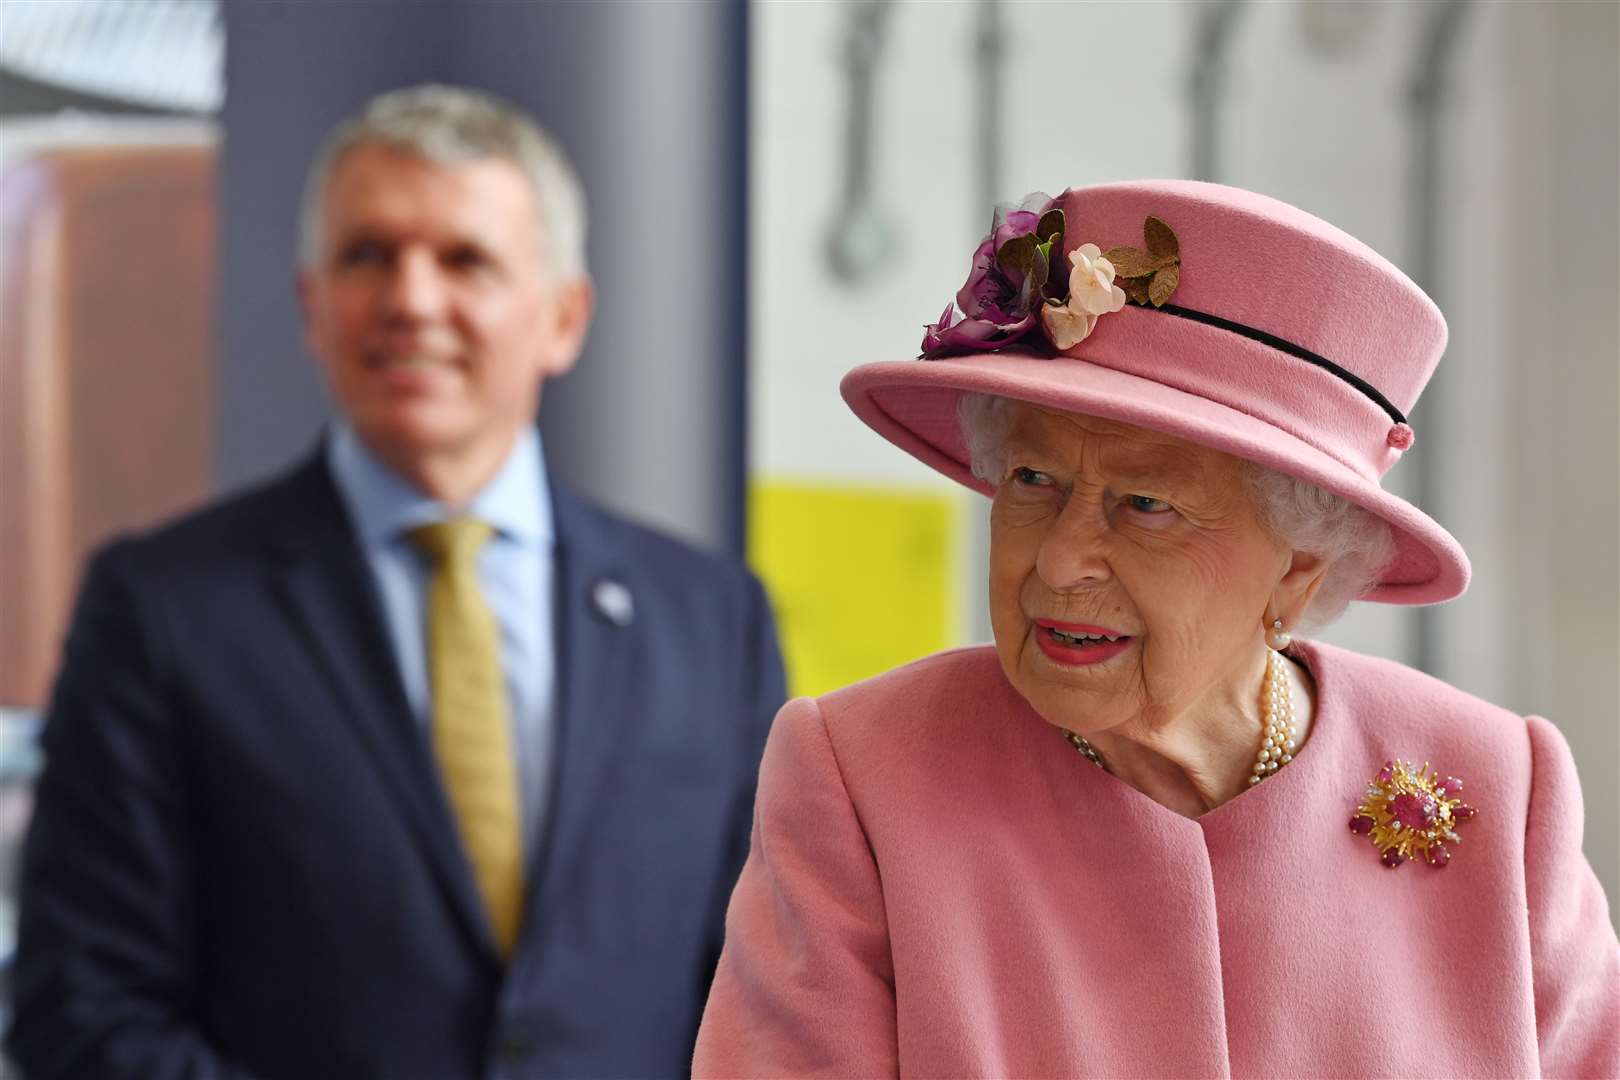 The Queen during the visit (Ben Stansall/PA)